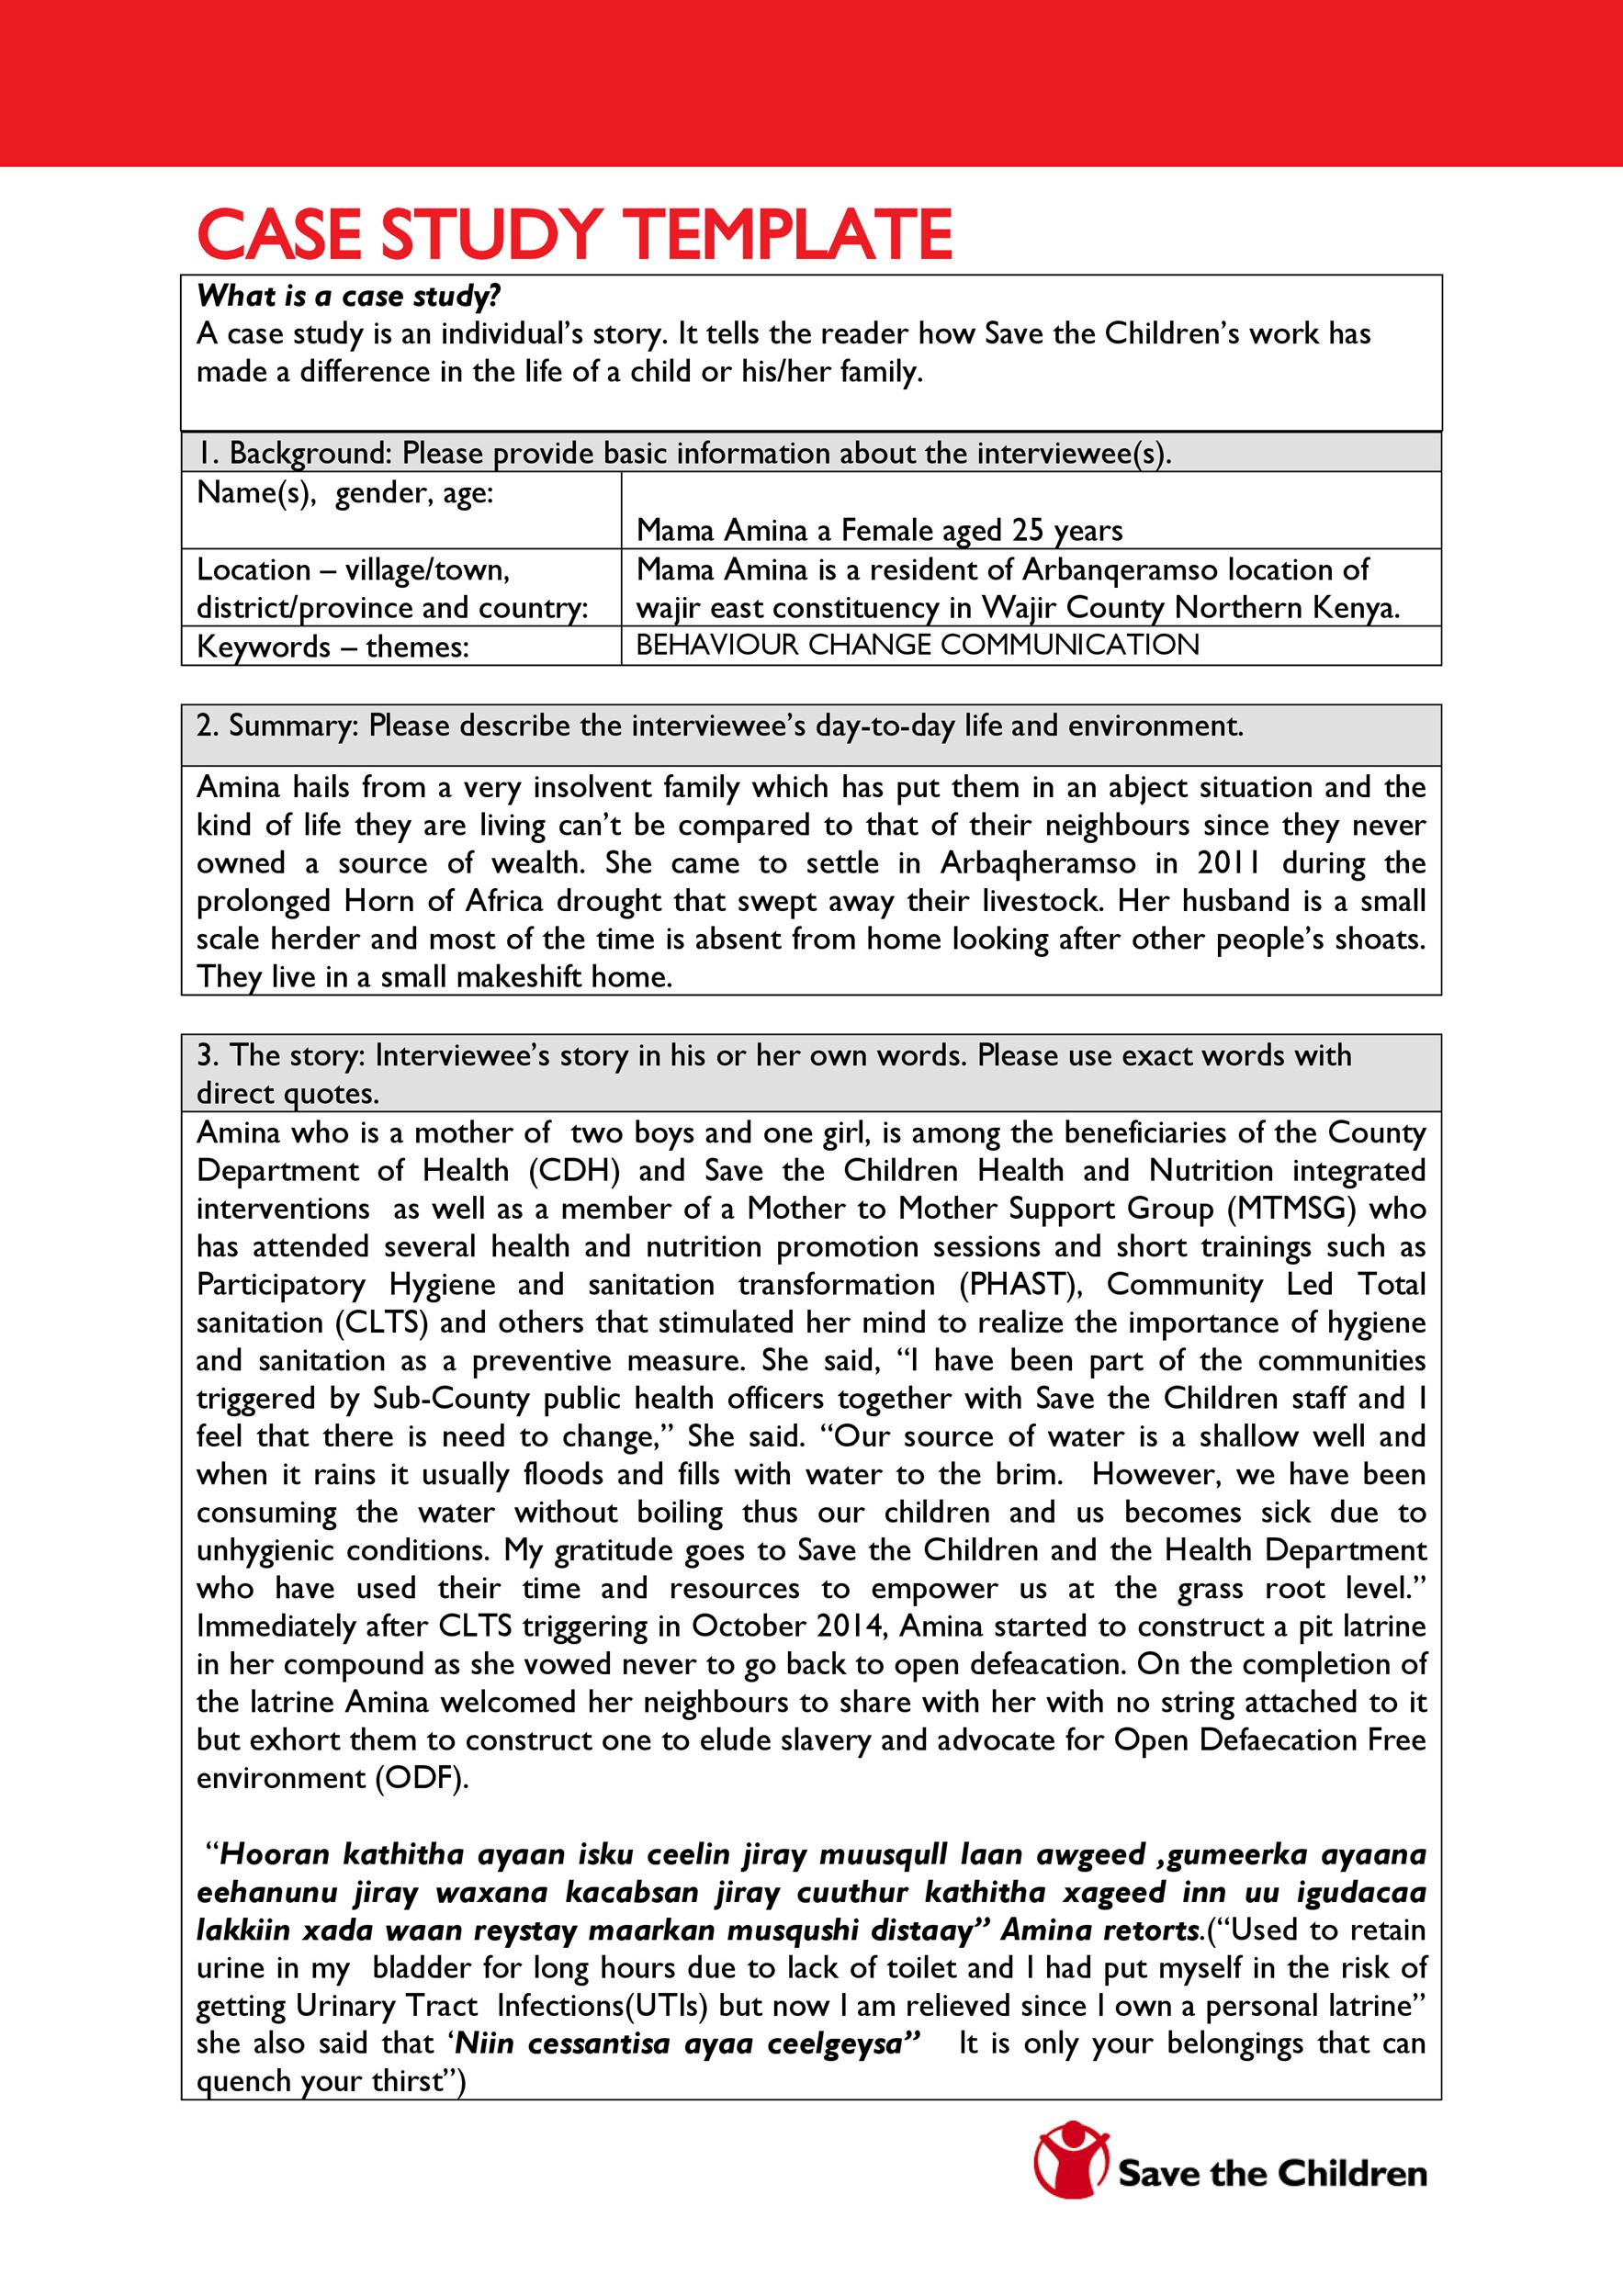 case study journal article